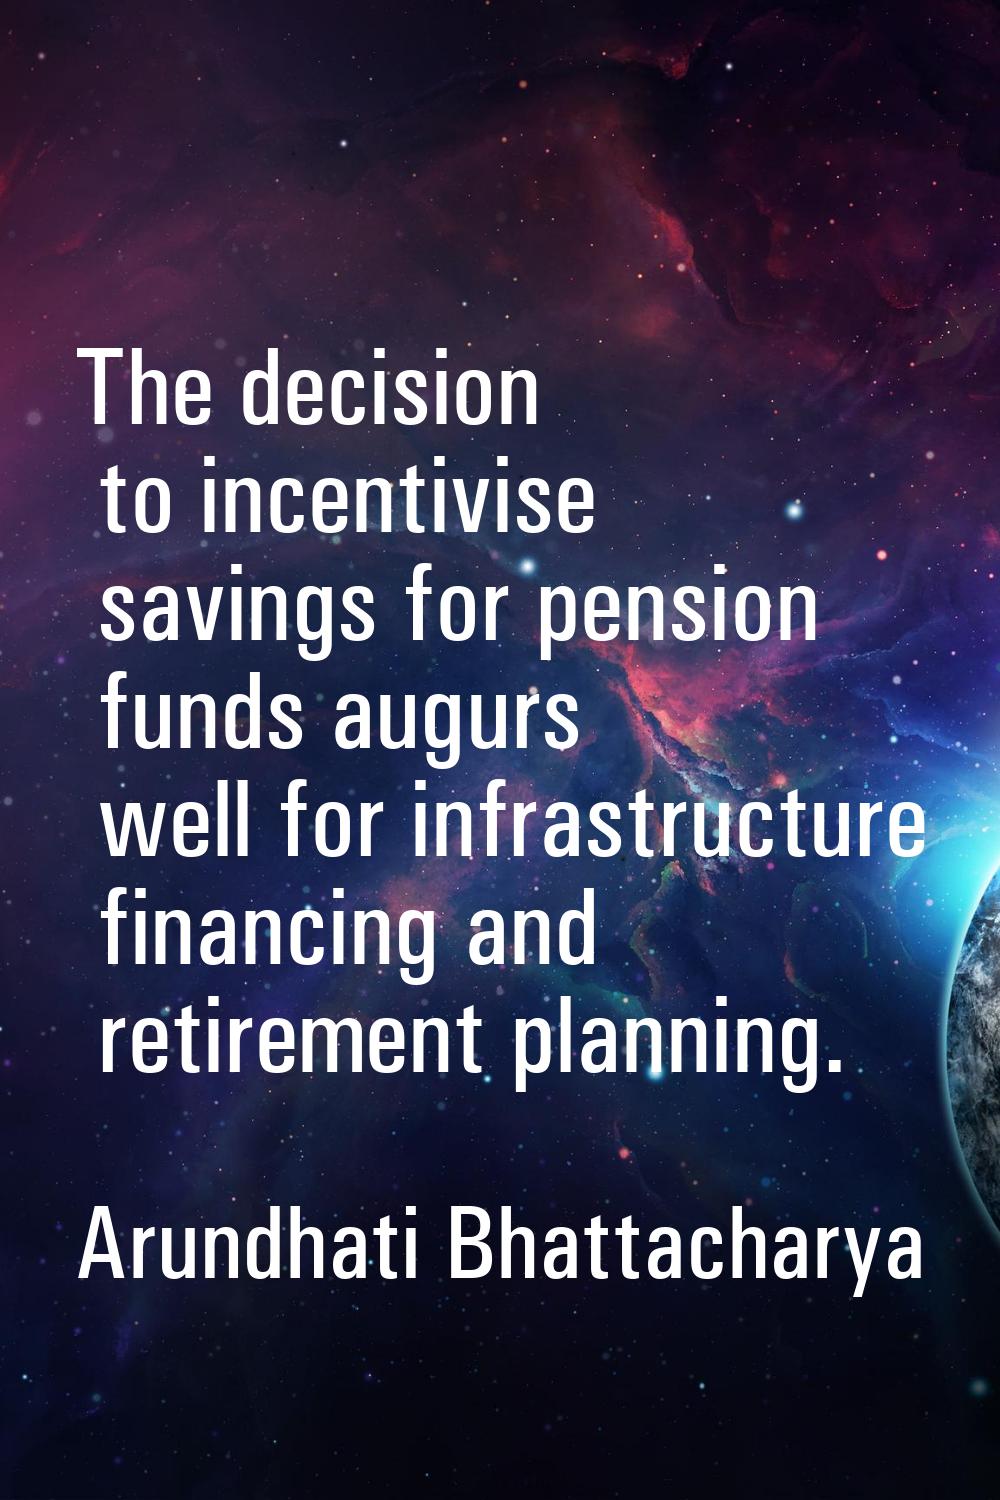 The decision to incentivise savings for pension funds augurs well for infrastructure financing and 